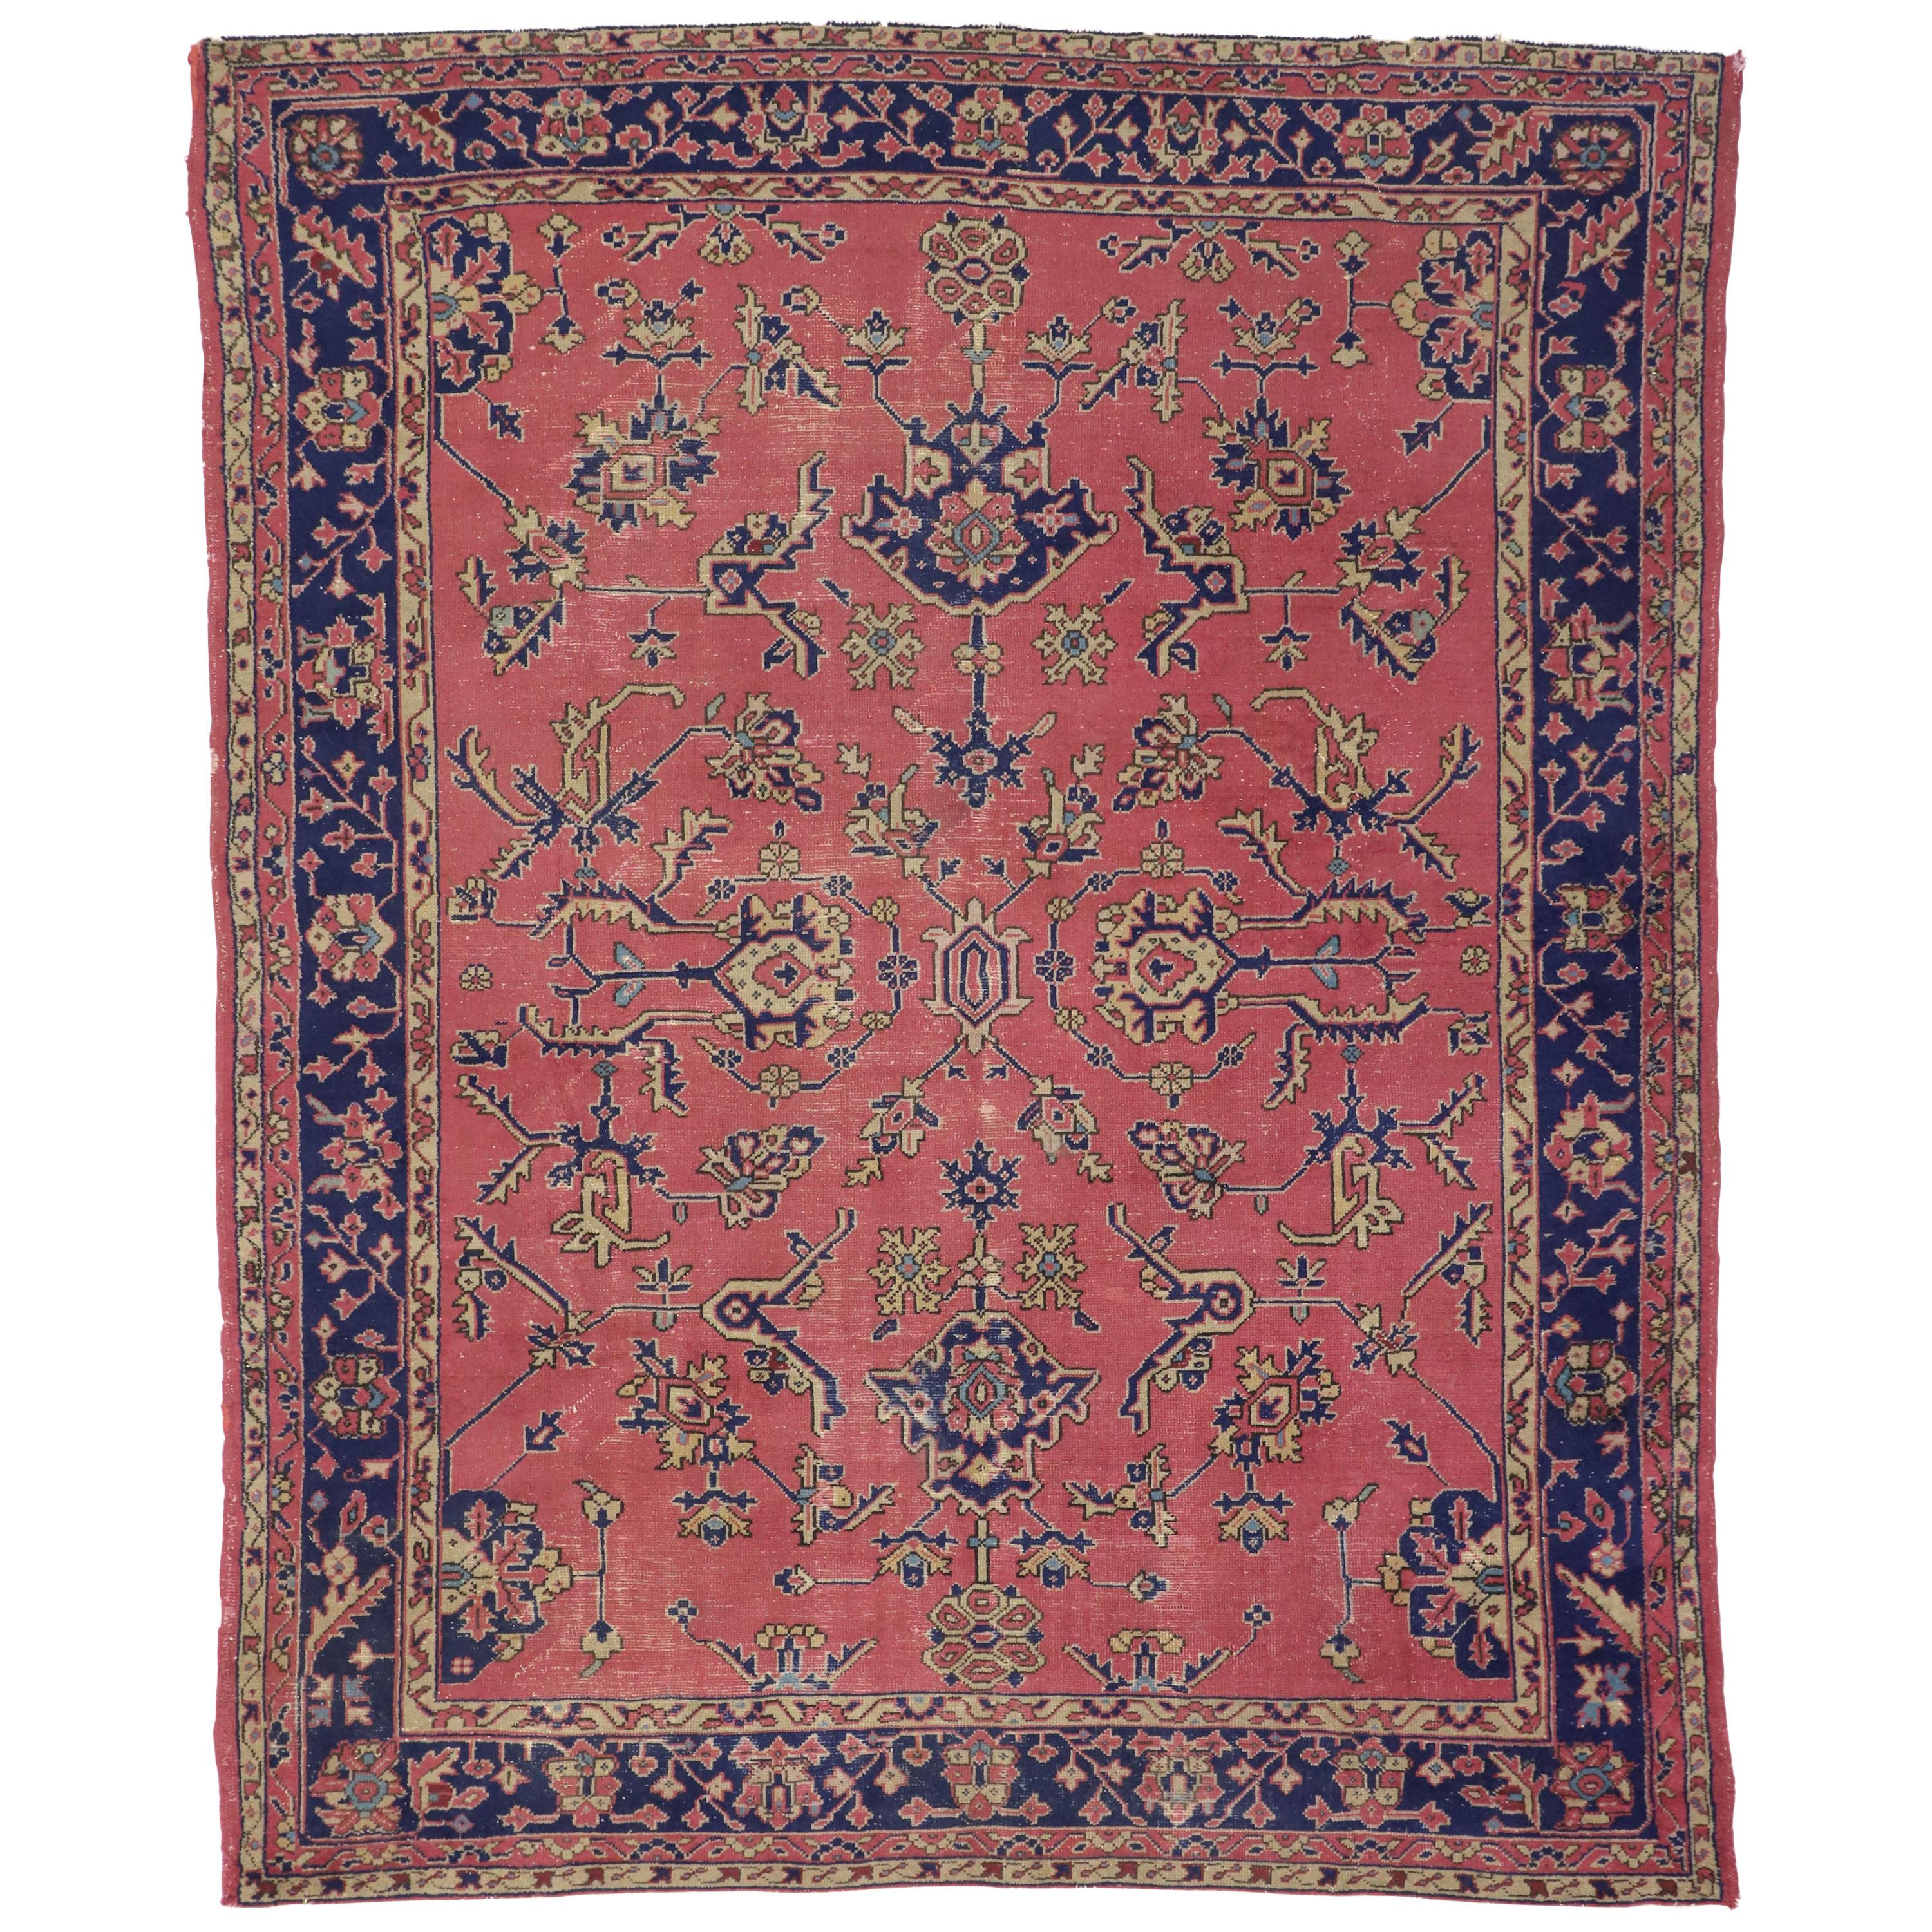 Distressed Antique Turkish Sparta Rug with Industrial Romantic Venetian Style